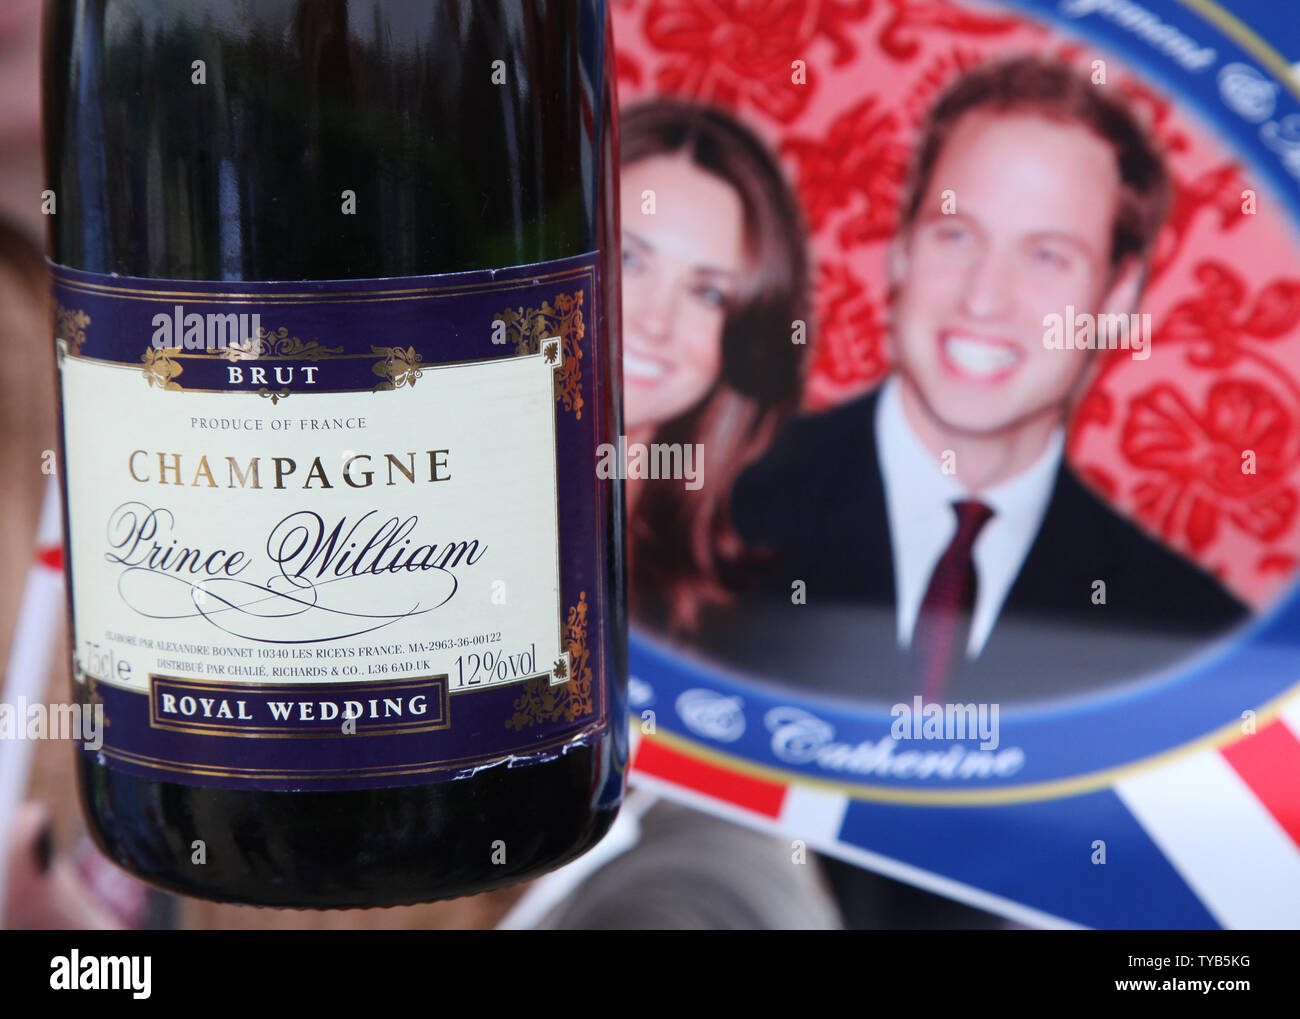 A bottle of champagne bearing the name of Prince William is seen during the  celebration of the Royal Wedding at Hyde Park in London on April 29, 2011.  The former Kate Middleton